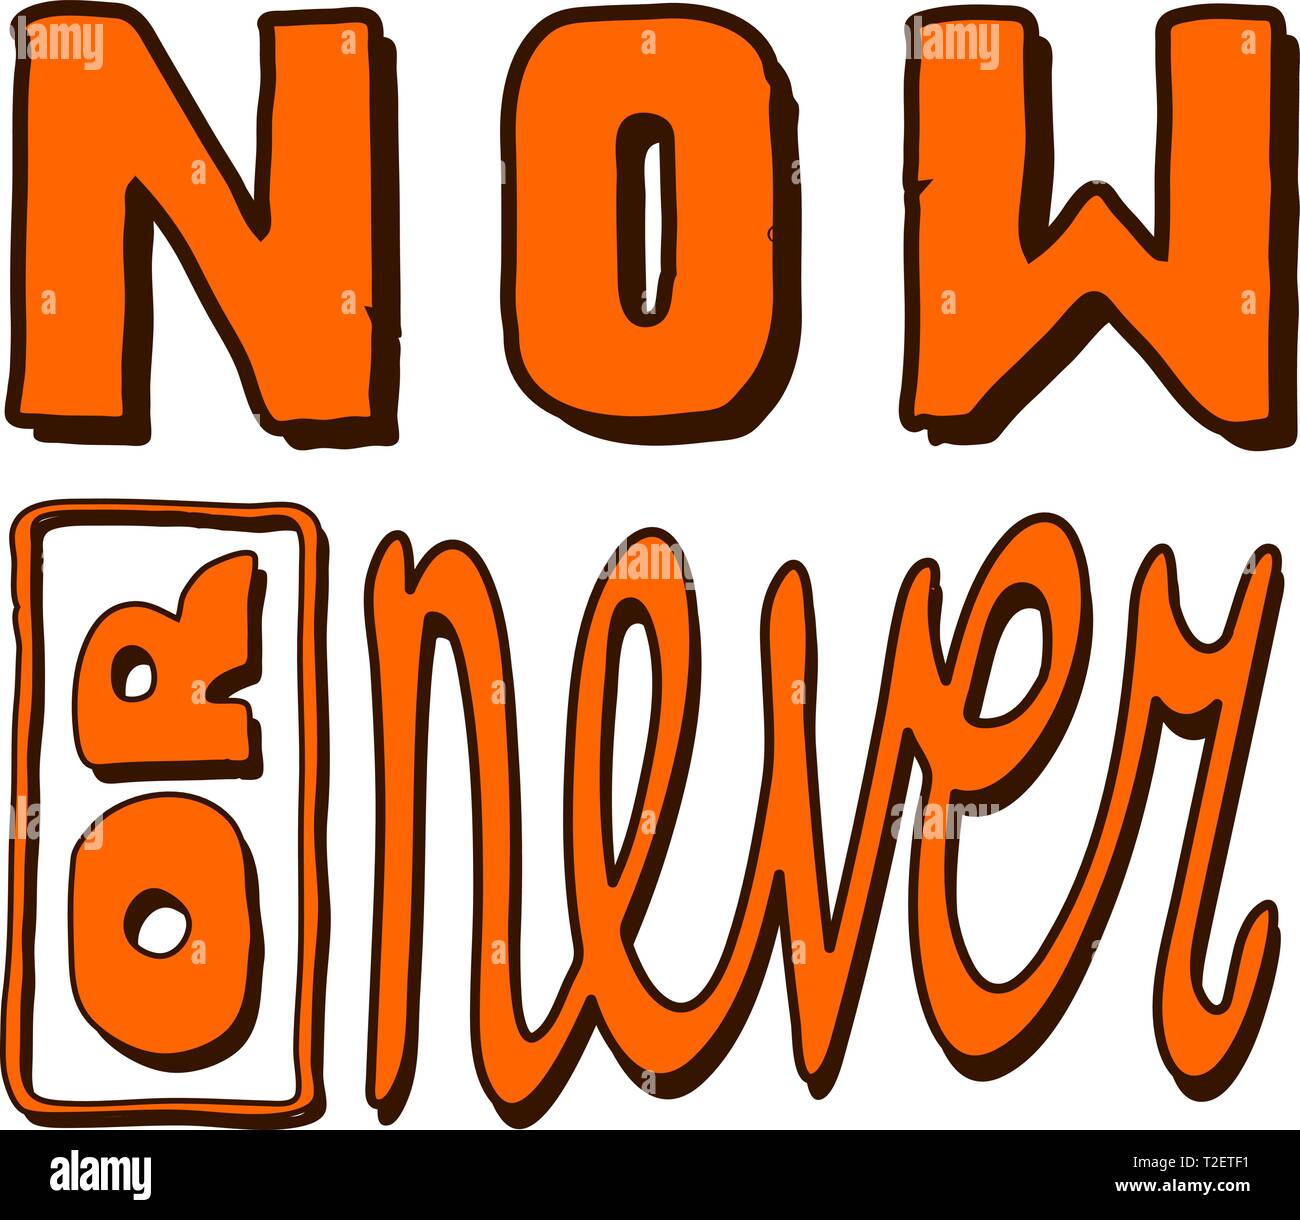 Now Or Never - funny inscription. Use of a pencil, a felt-tip pen, software brushes. Hand drawing, lettering, doodles. For T-shirts, mugs, postcards. Stock Vector